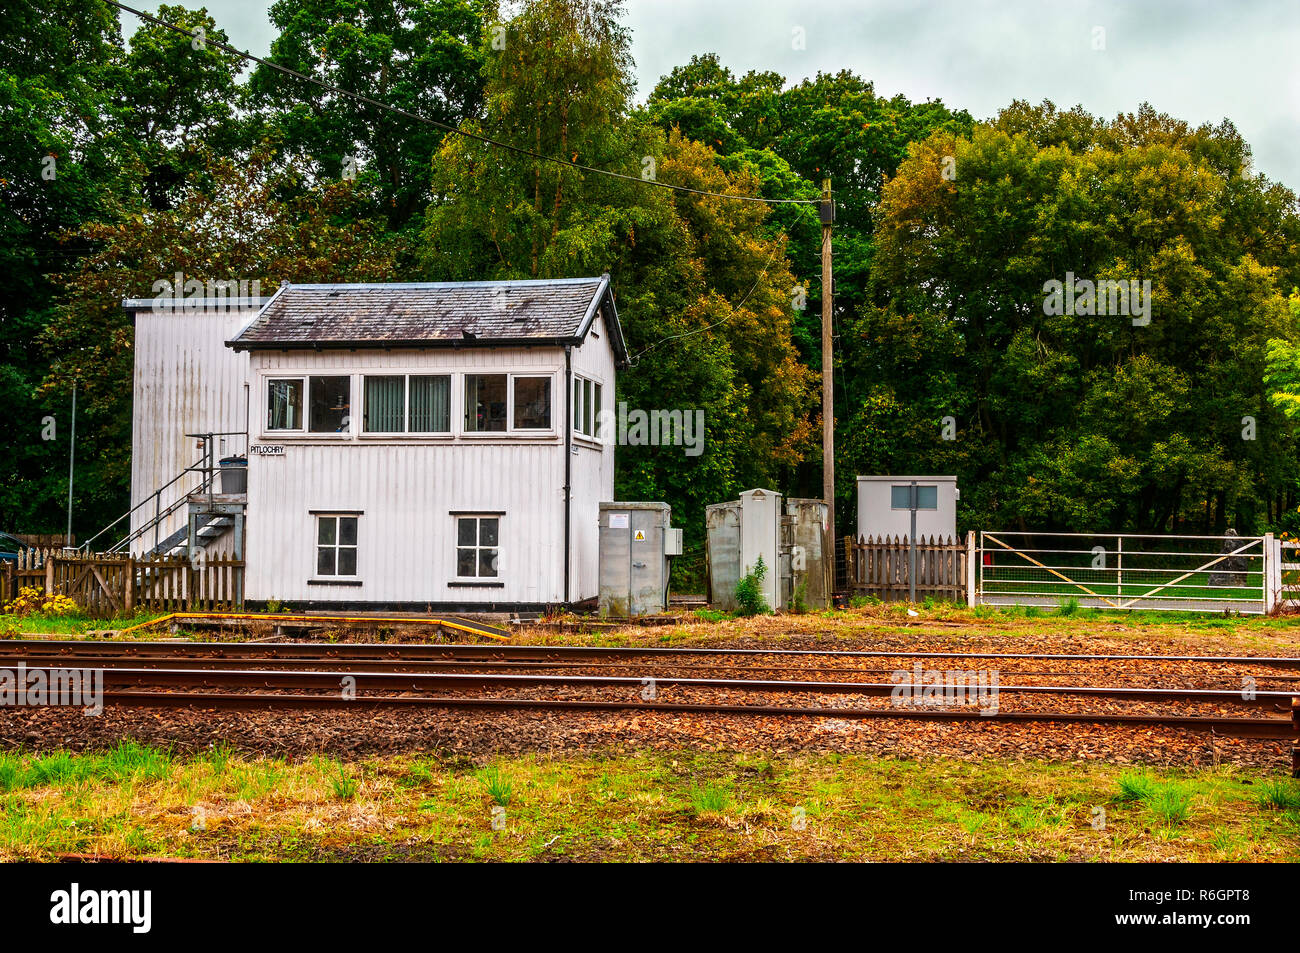 The distinctive and prominent gabled Highland Railway signal box at Pitlochry railway station, extensively remodelled in the early 21st century Stock Photo